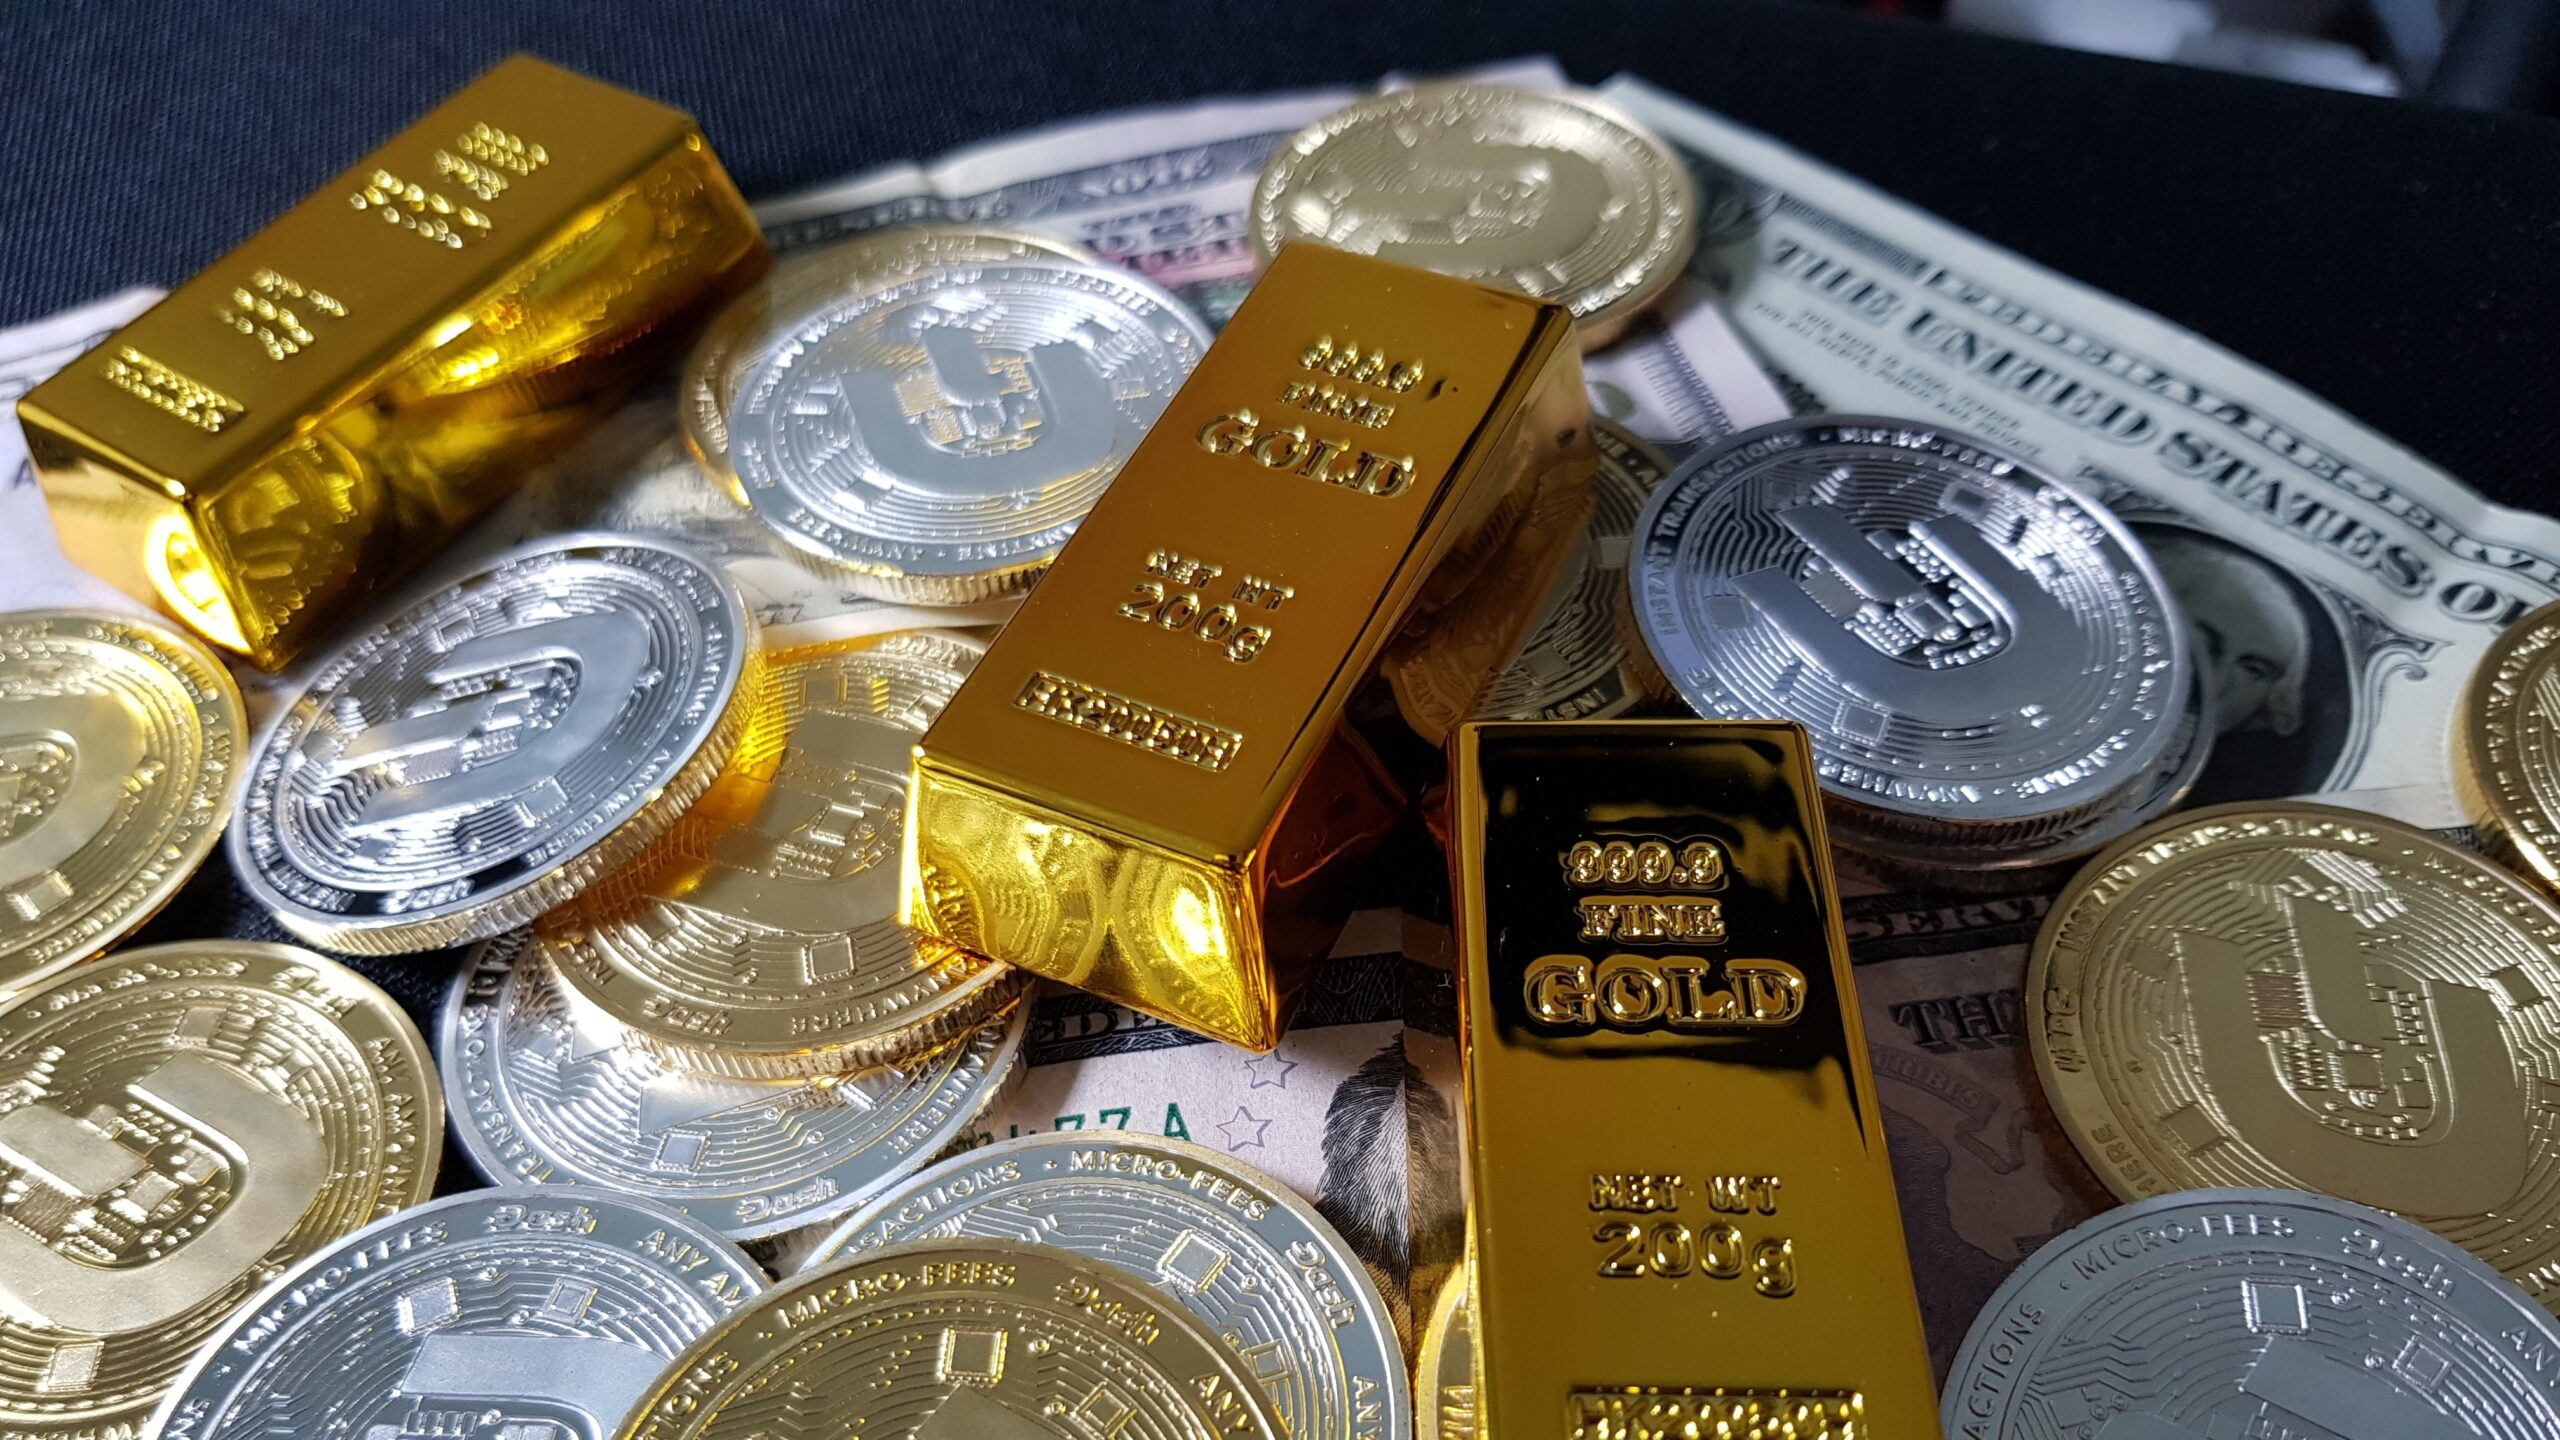 The Real Deal: Why Owning Physical Gold and Silver Matters